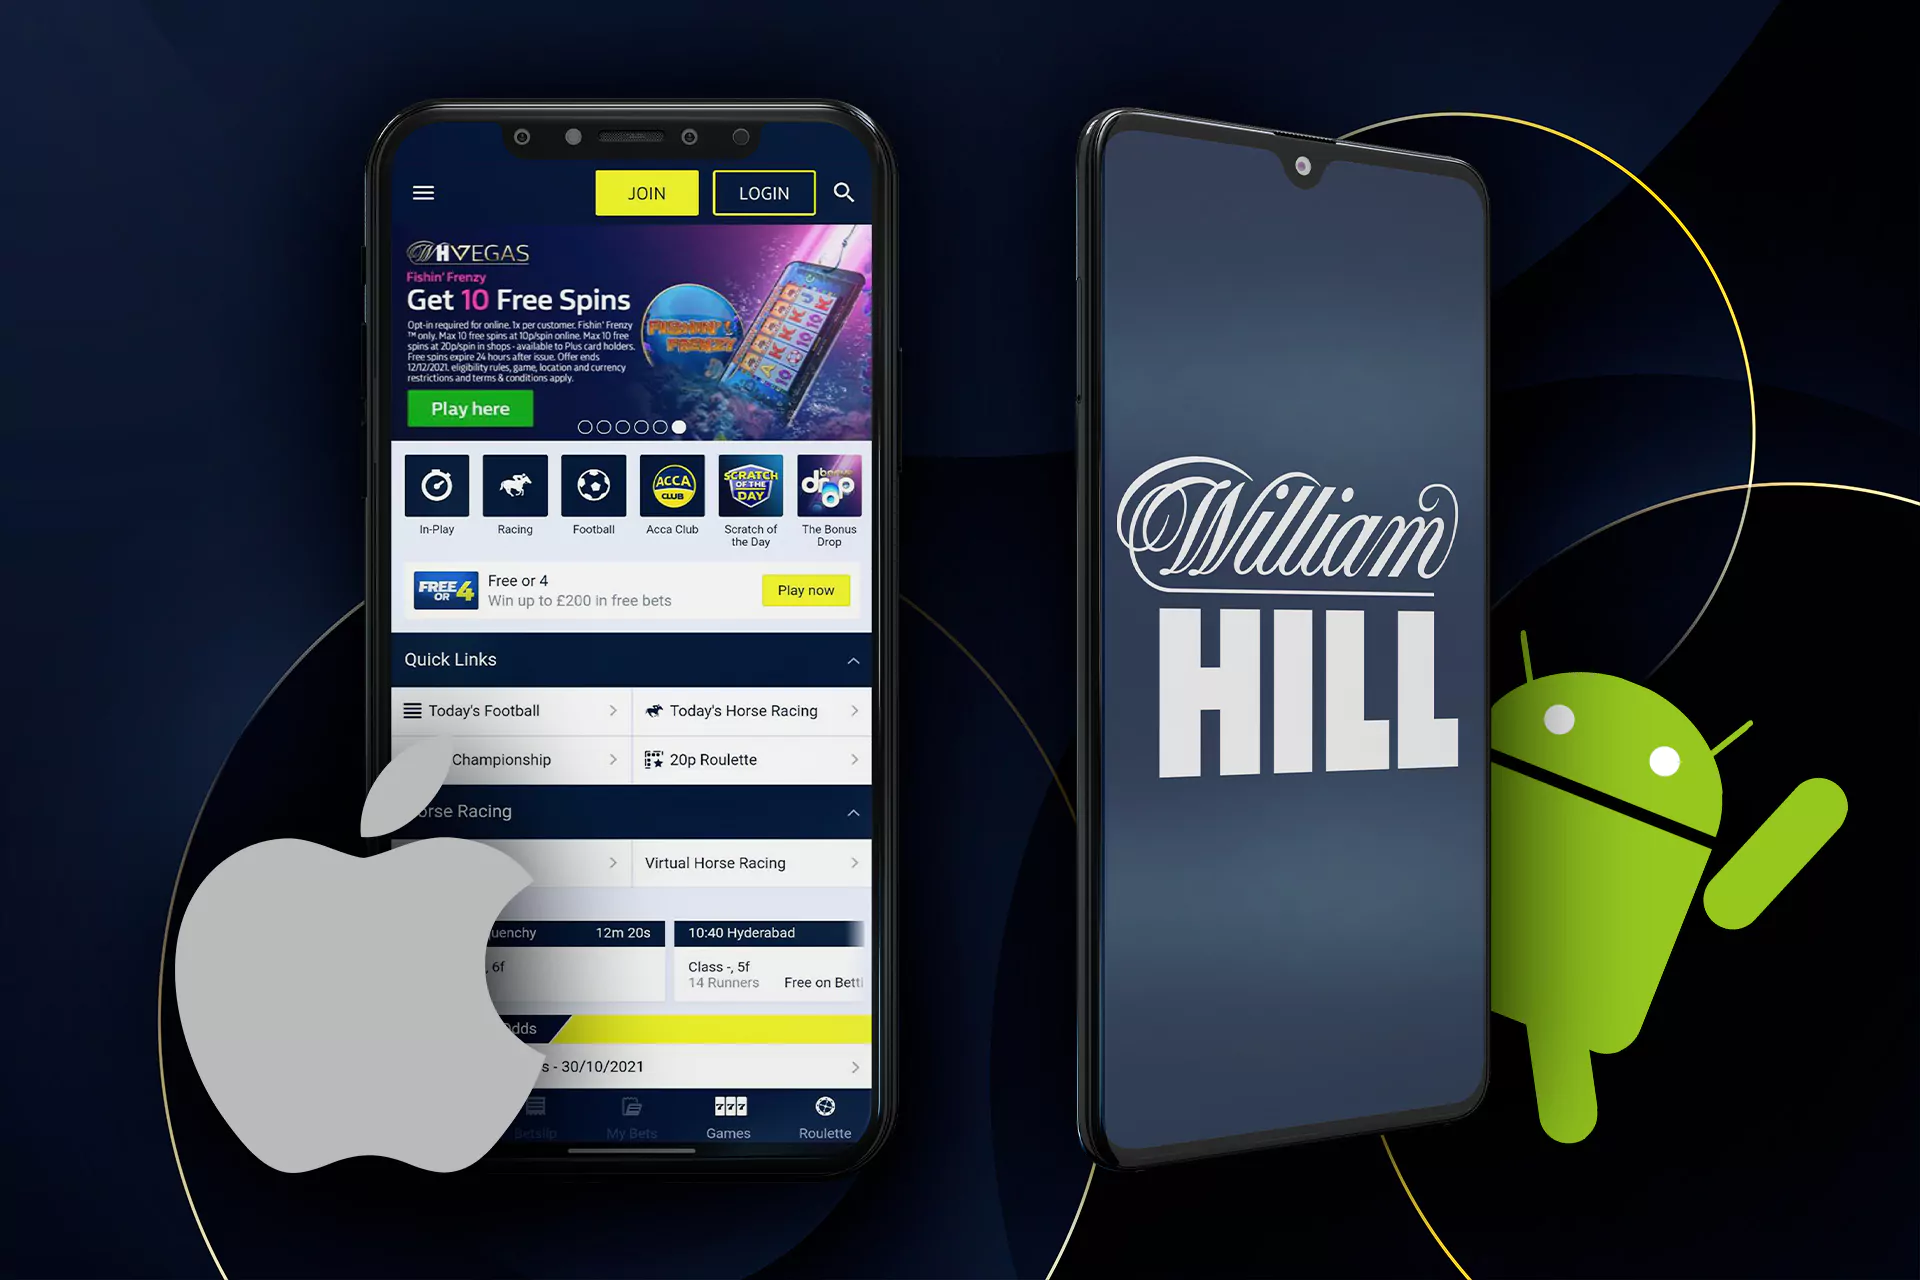 Download the William Hill app and place bets whenever you want.